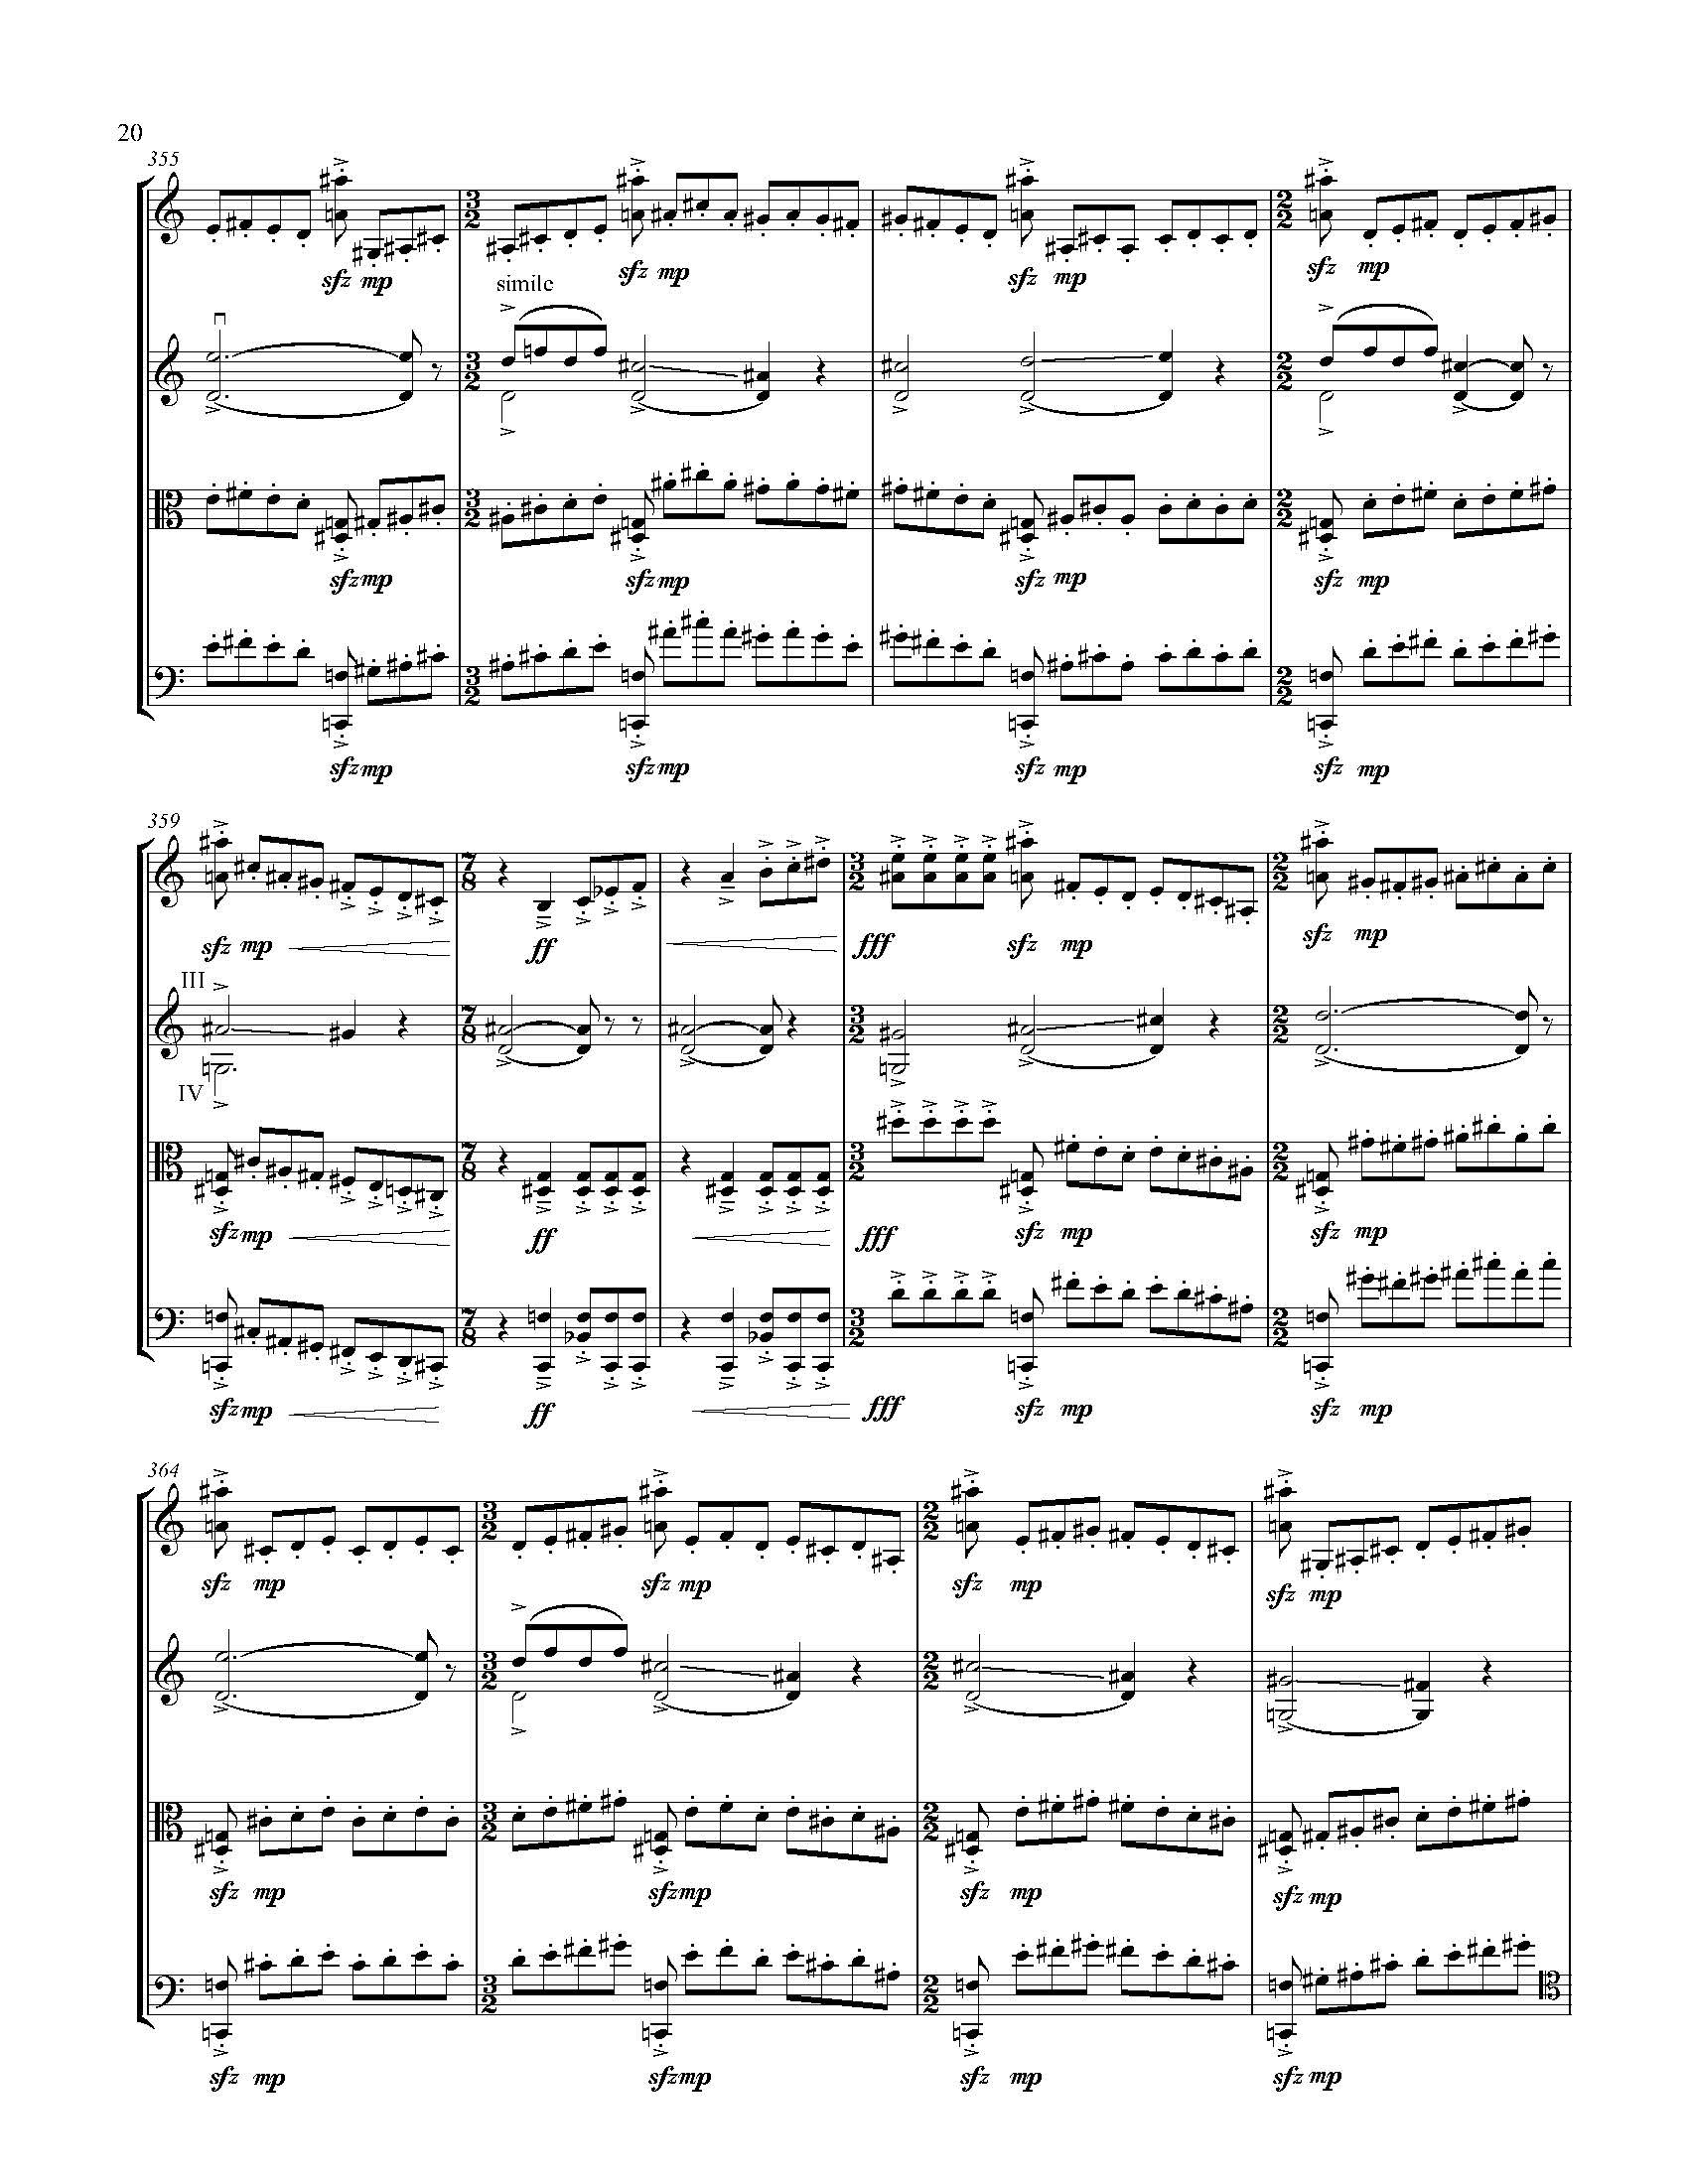 A Country of Vast Designs - Complete Score_Page_26.jpg